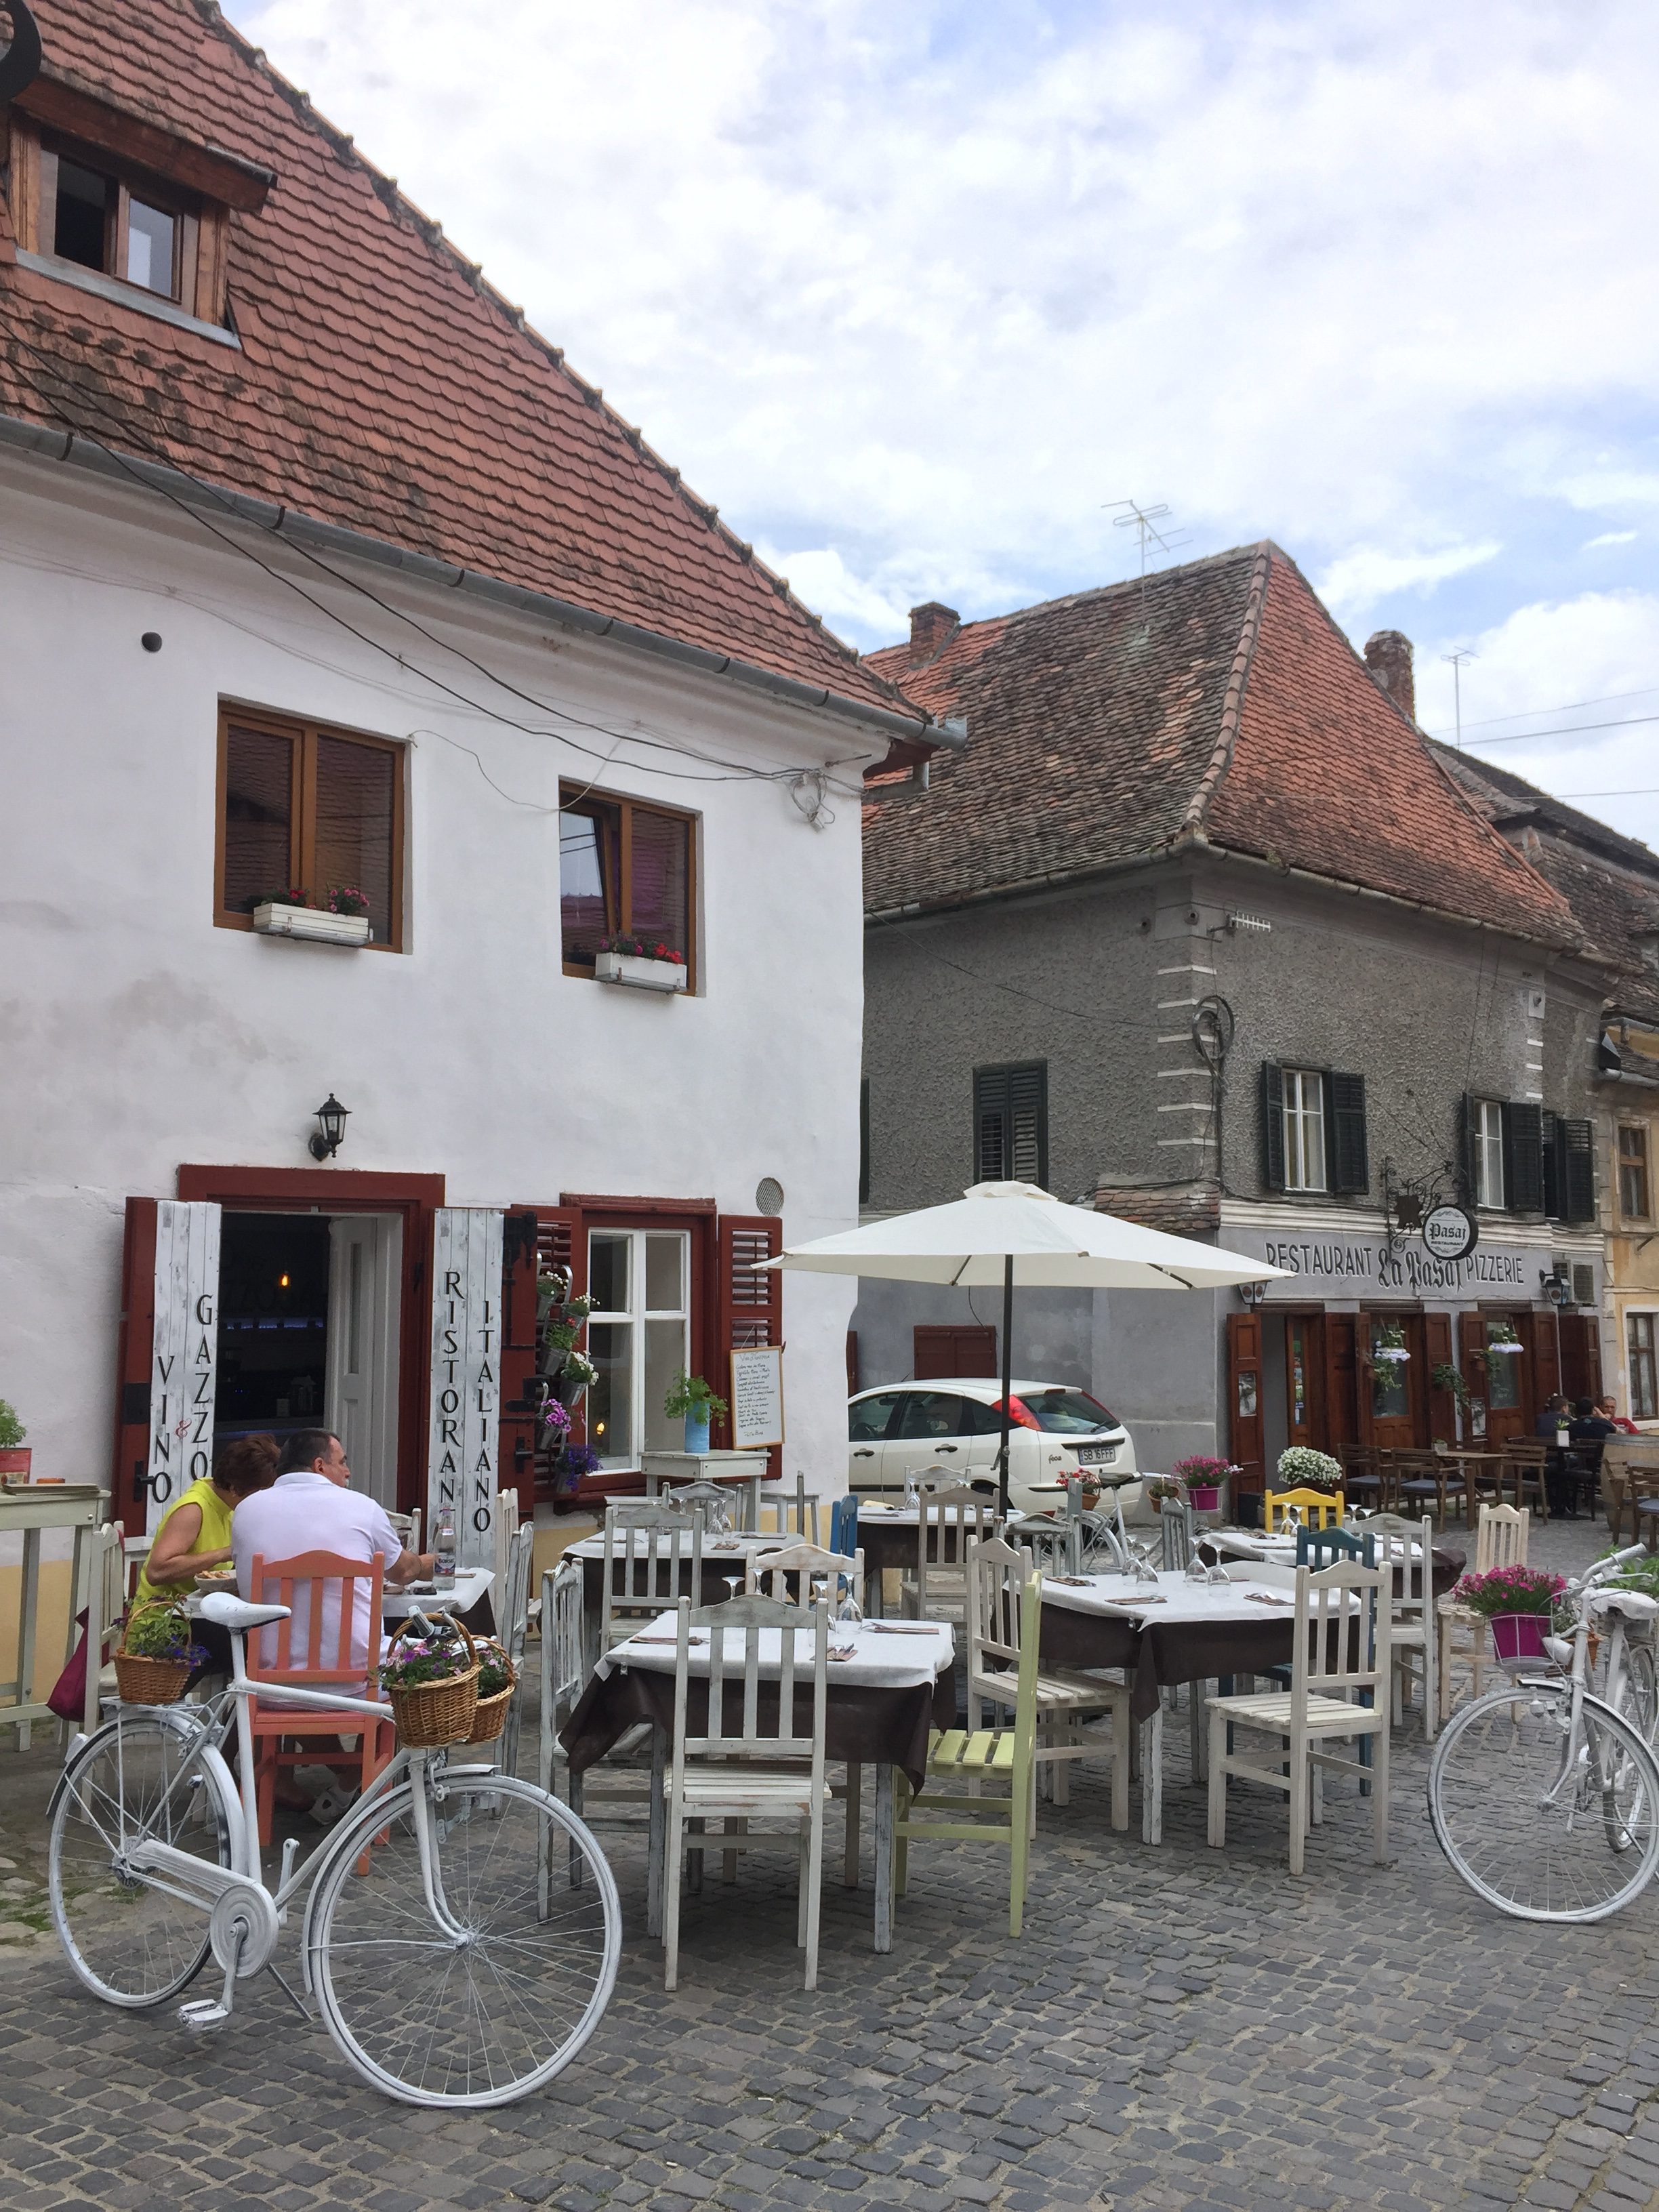 A bistro in the Lower town